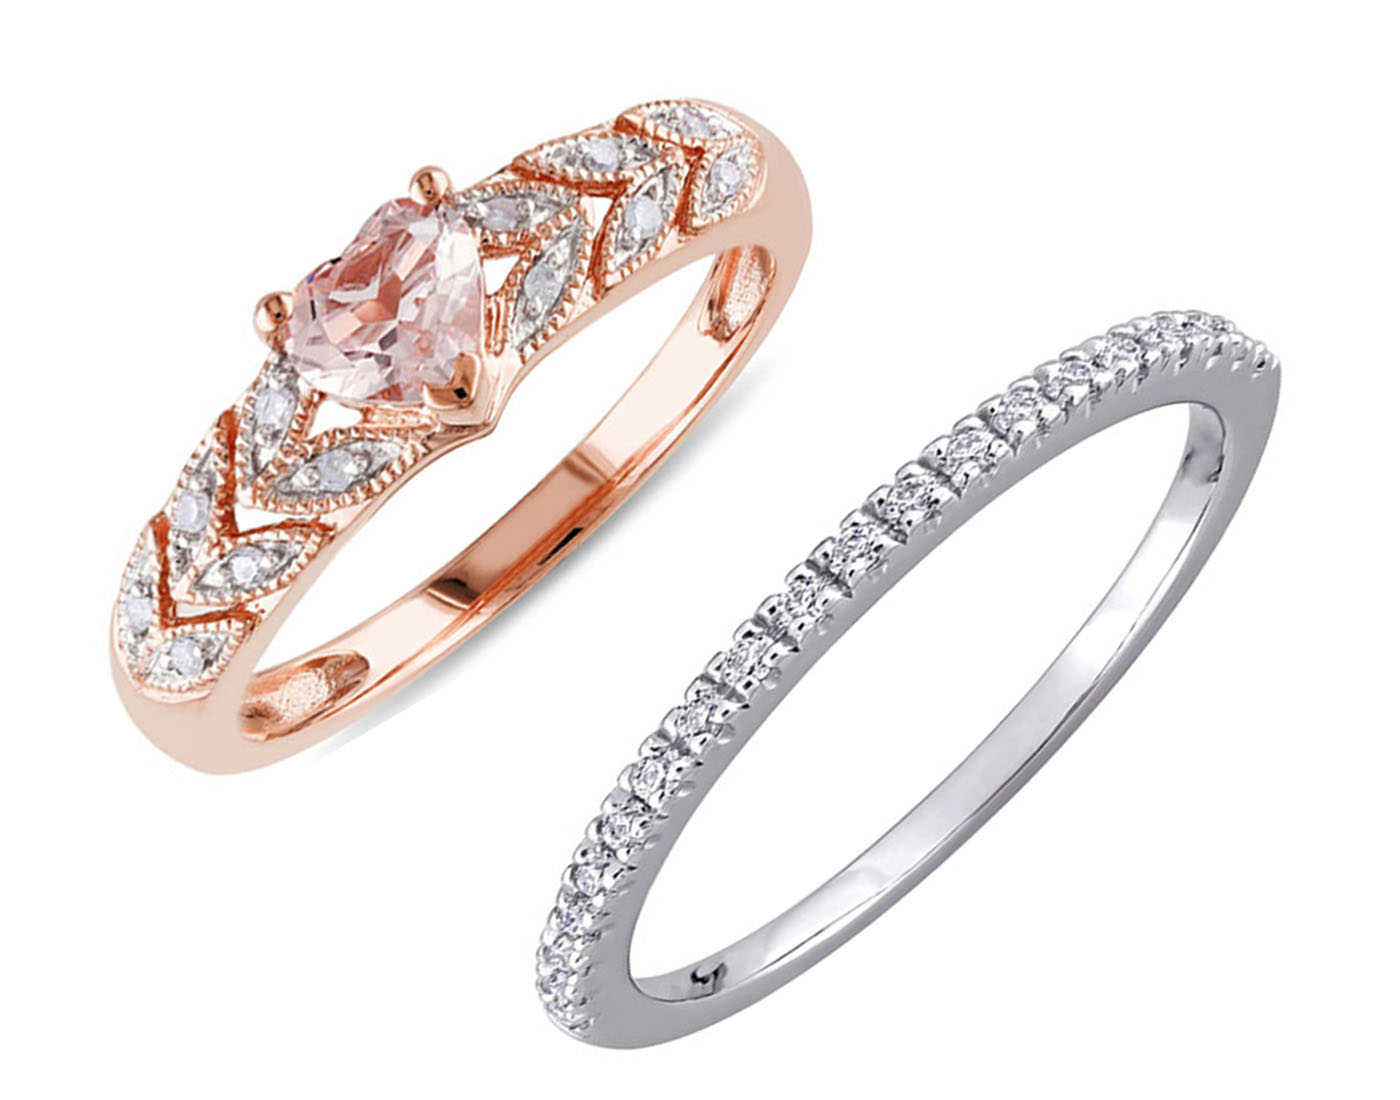 Enter now for a chance to win a stunning Amour ring from Best Buy ...